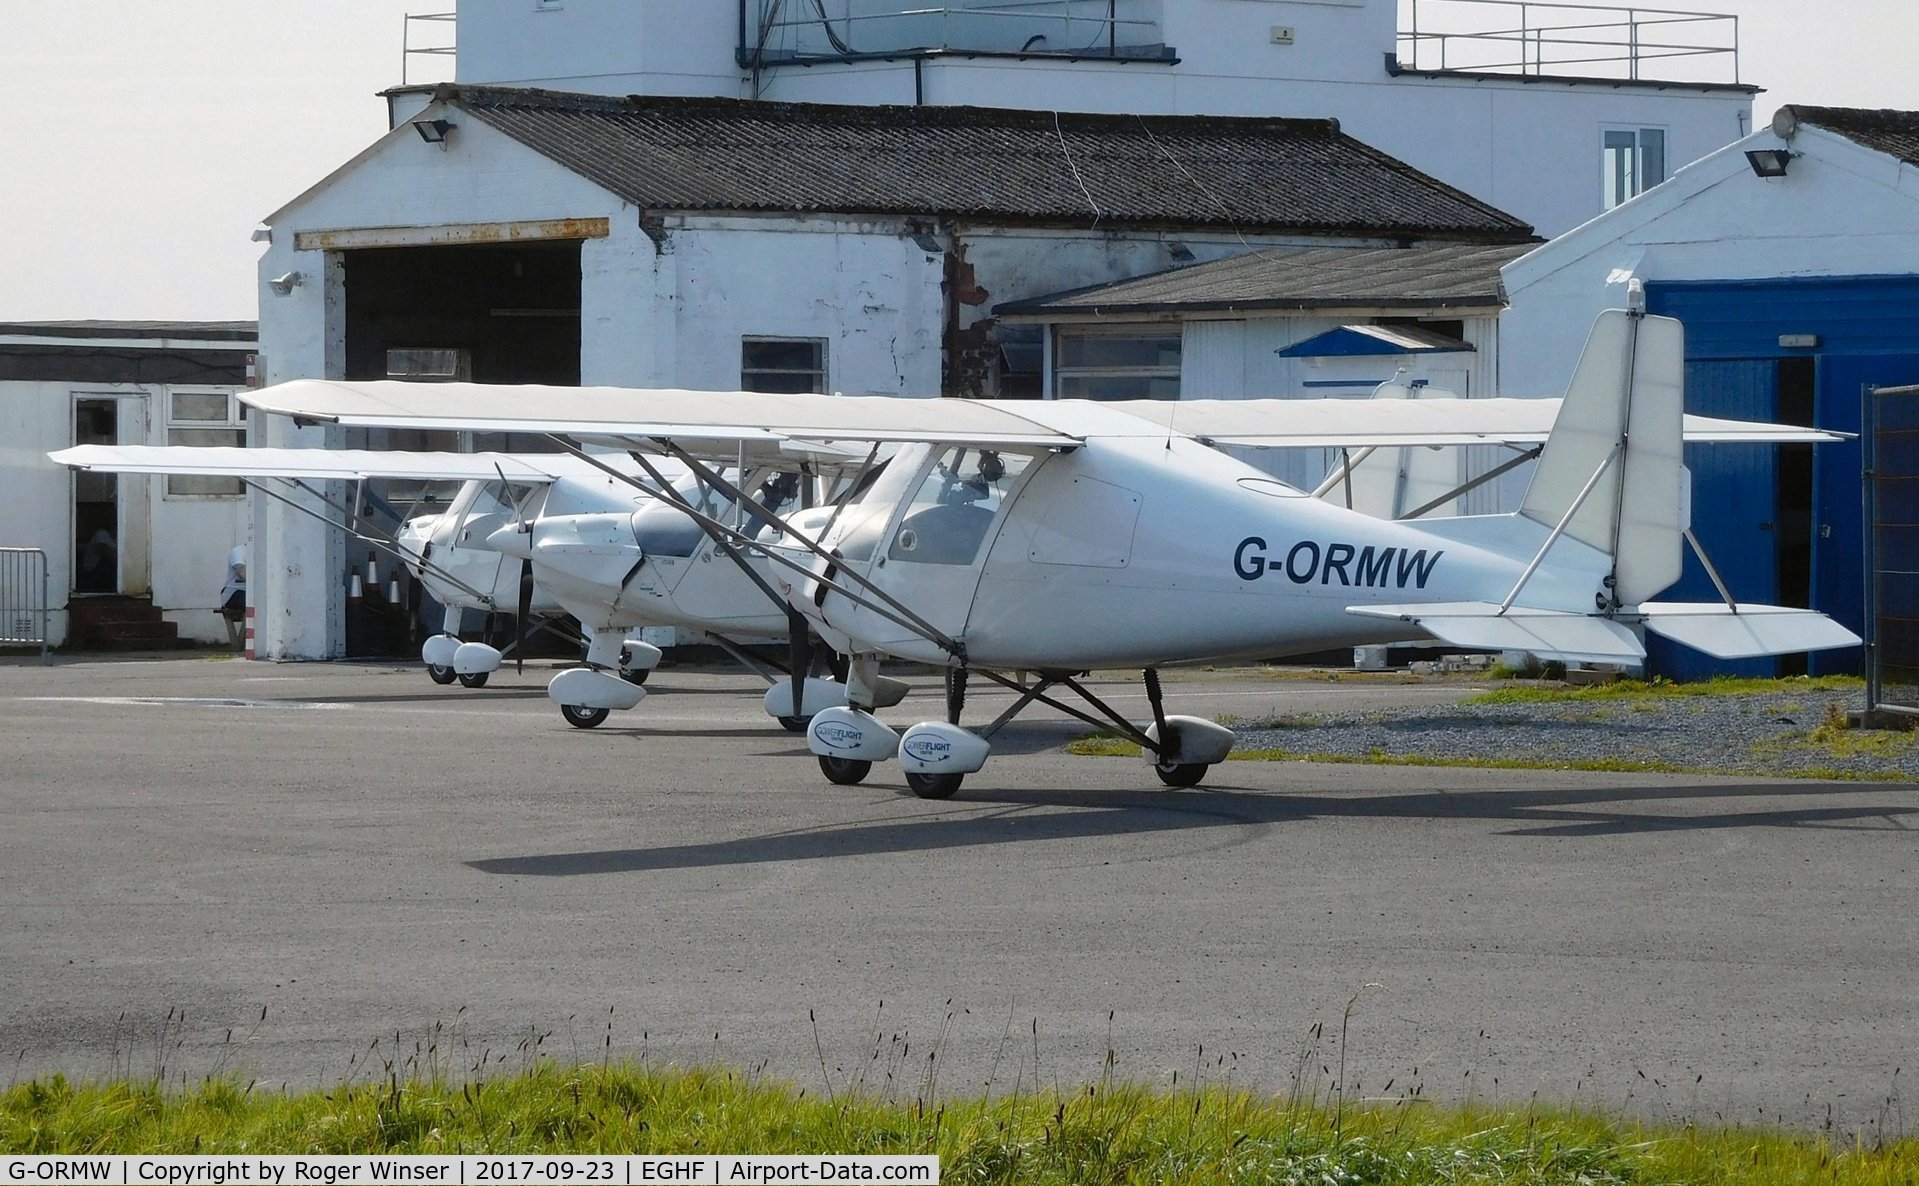 G-ORMW, 2005 Comco Ikarus C42 FB100 C/N 0501-6653, Resident C42 with the two other Ikarus C.42 aircraft operated by Gower Flight Centre.